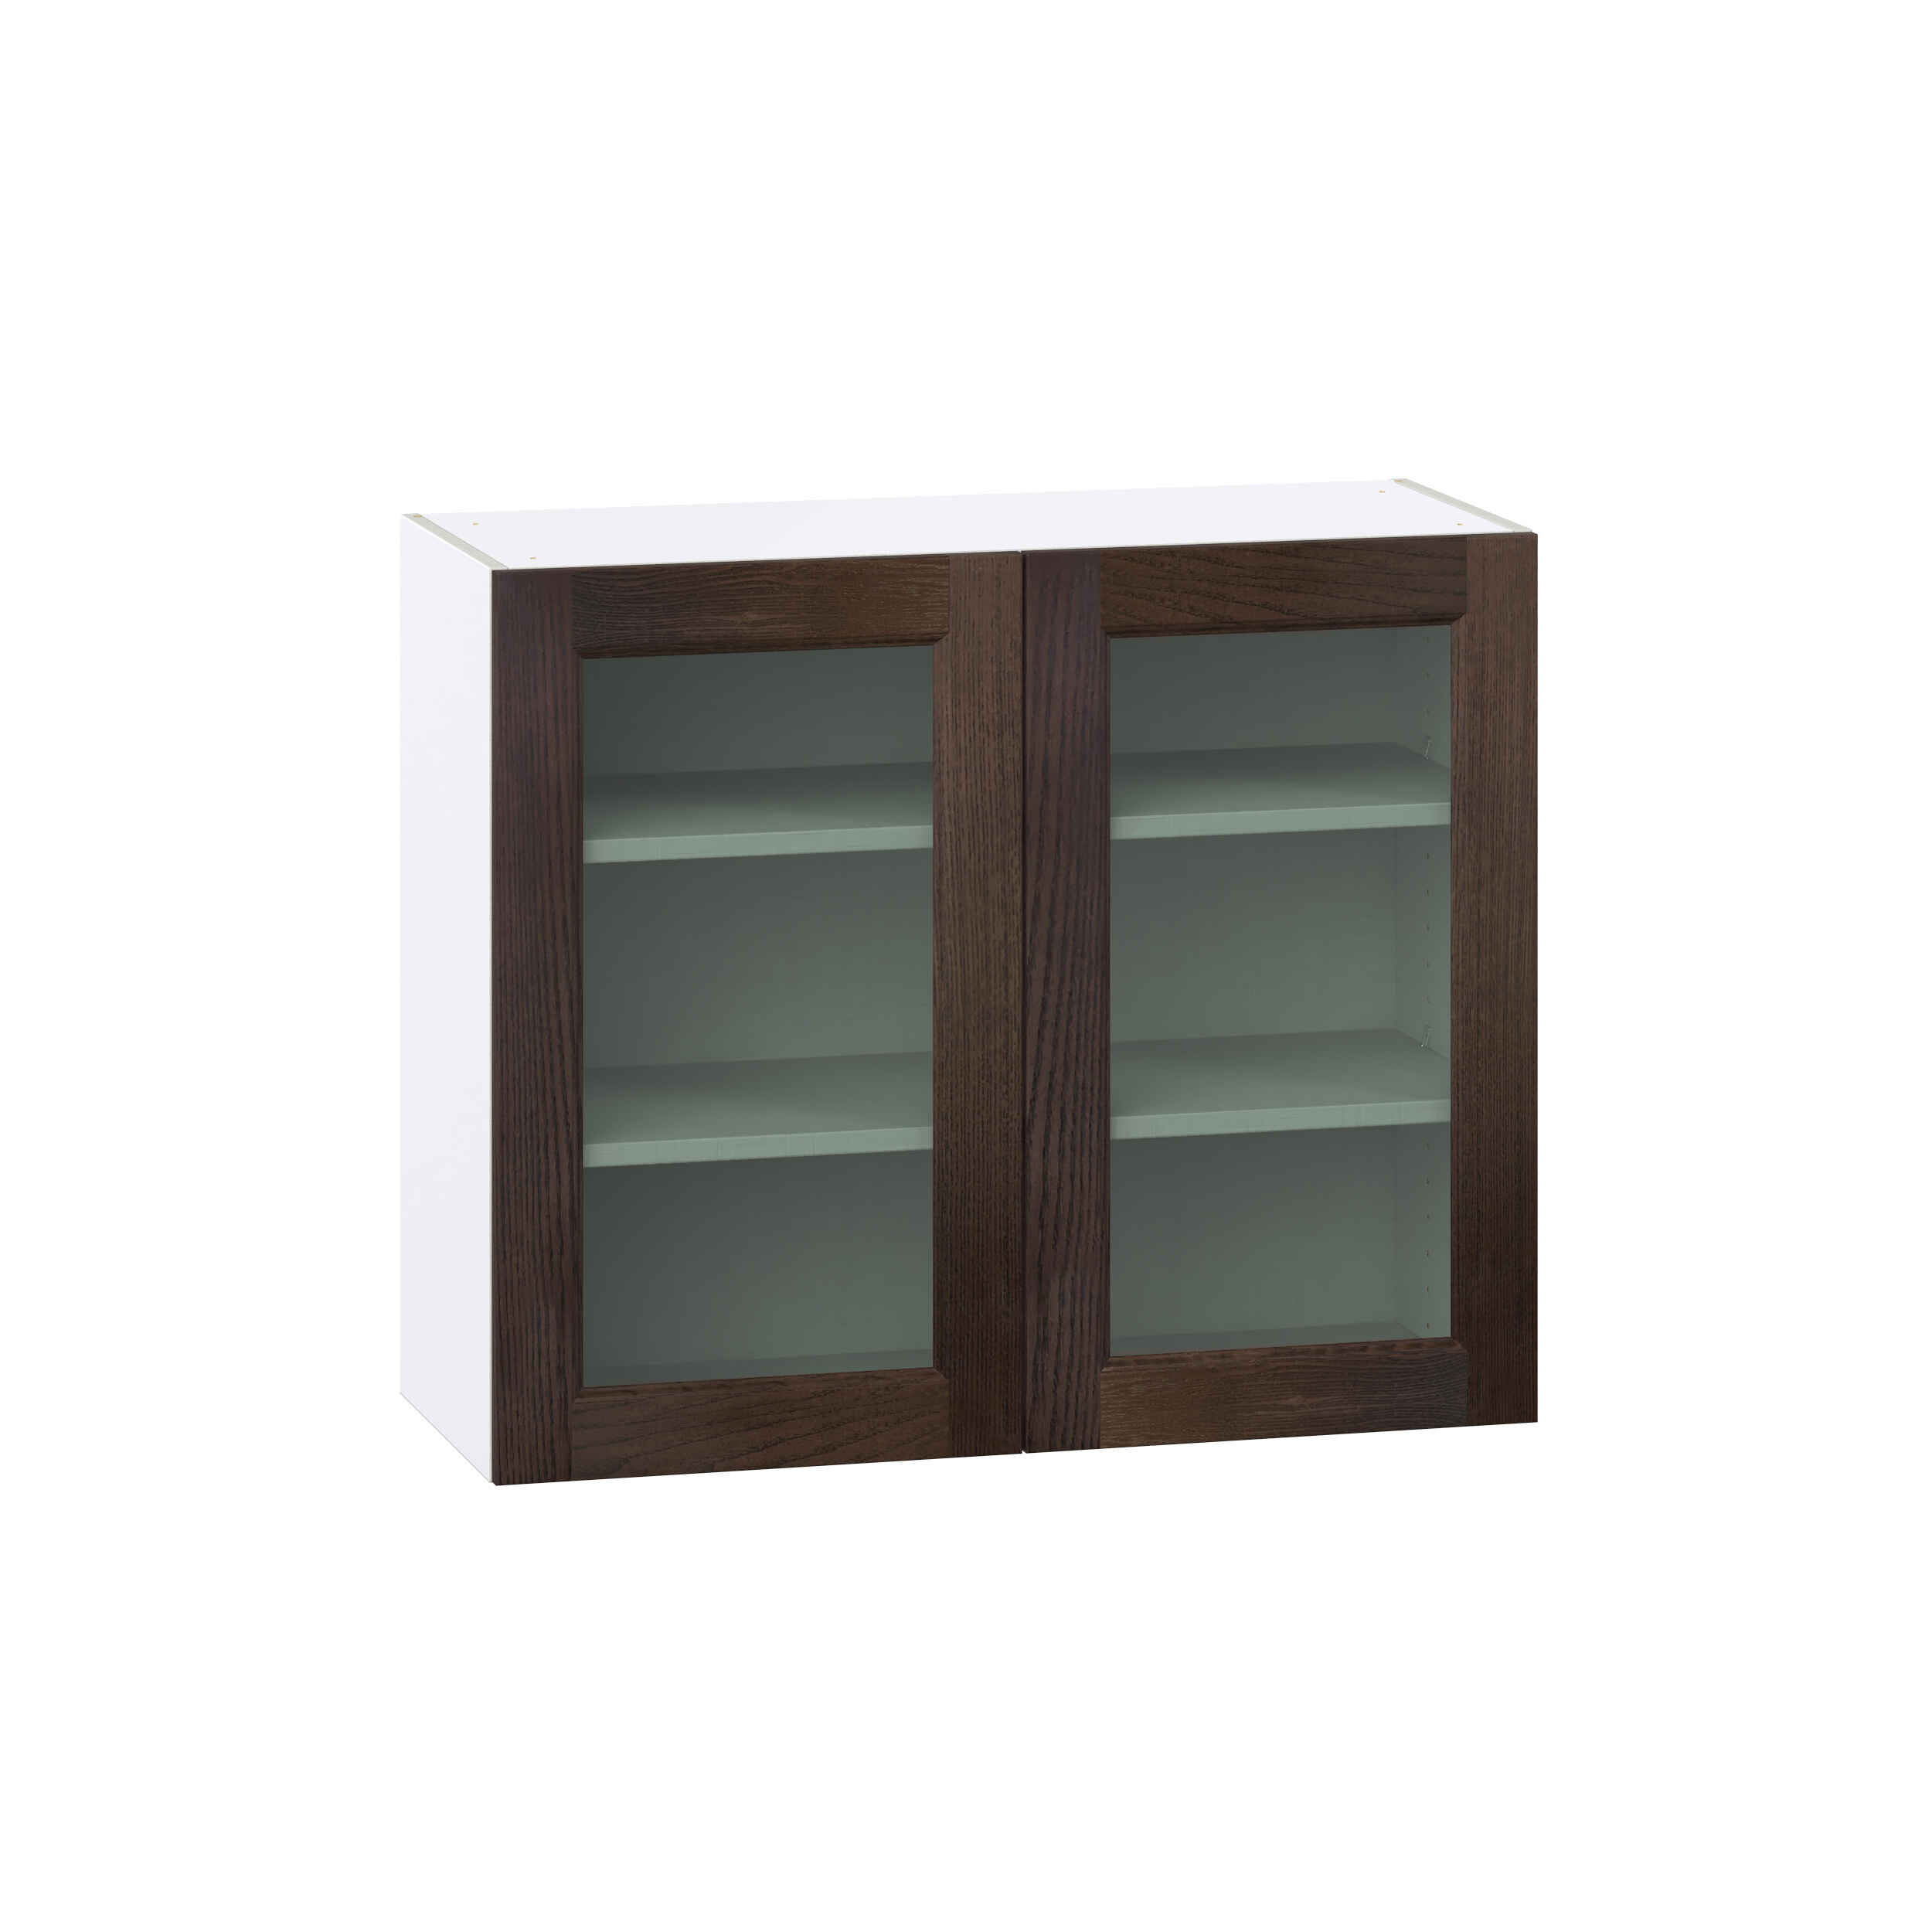 Summerina Chestnut Solid Wood Assembled Wall  Cabinet with 2 Glass Doors (36 in. W x 30 in. H x 14 in. D)